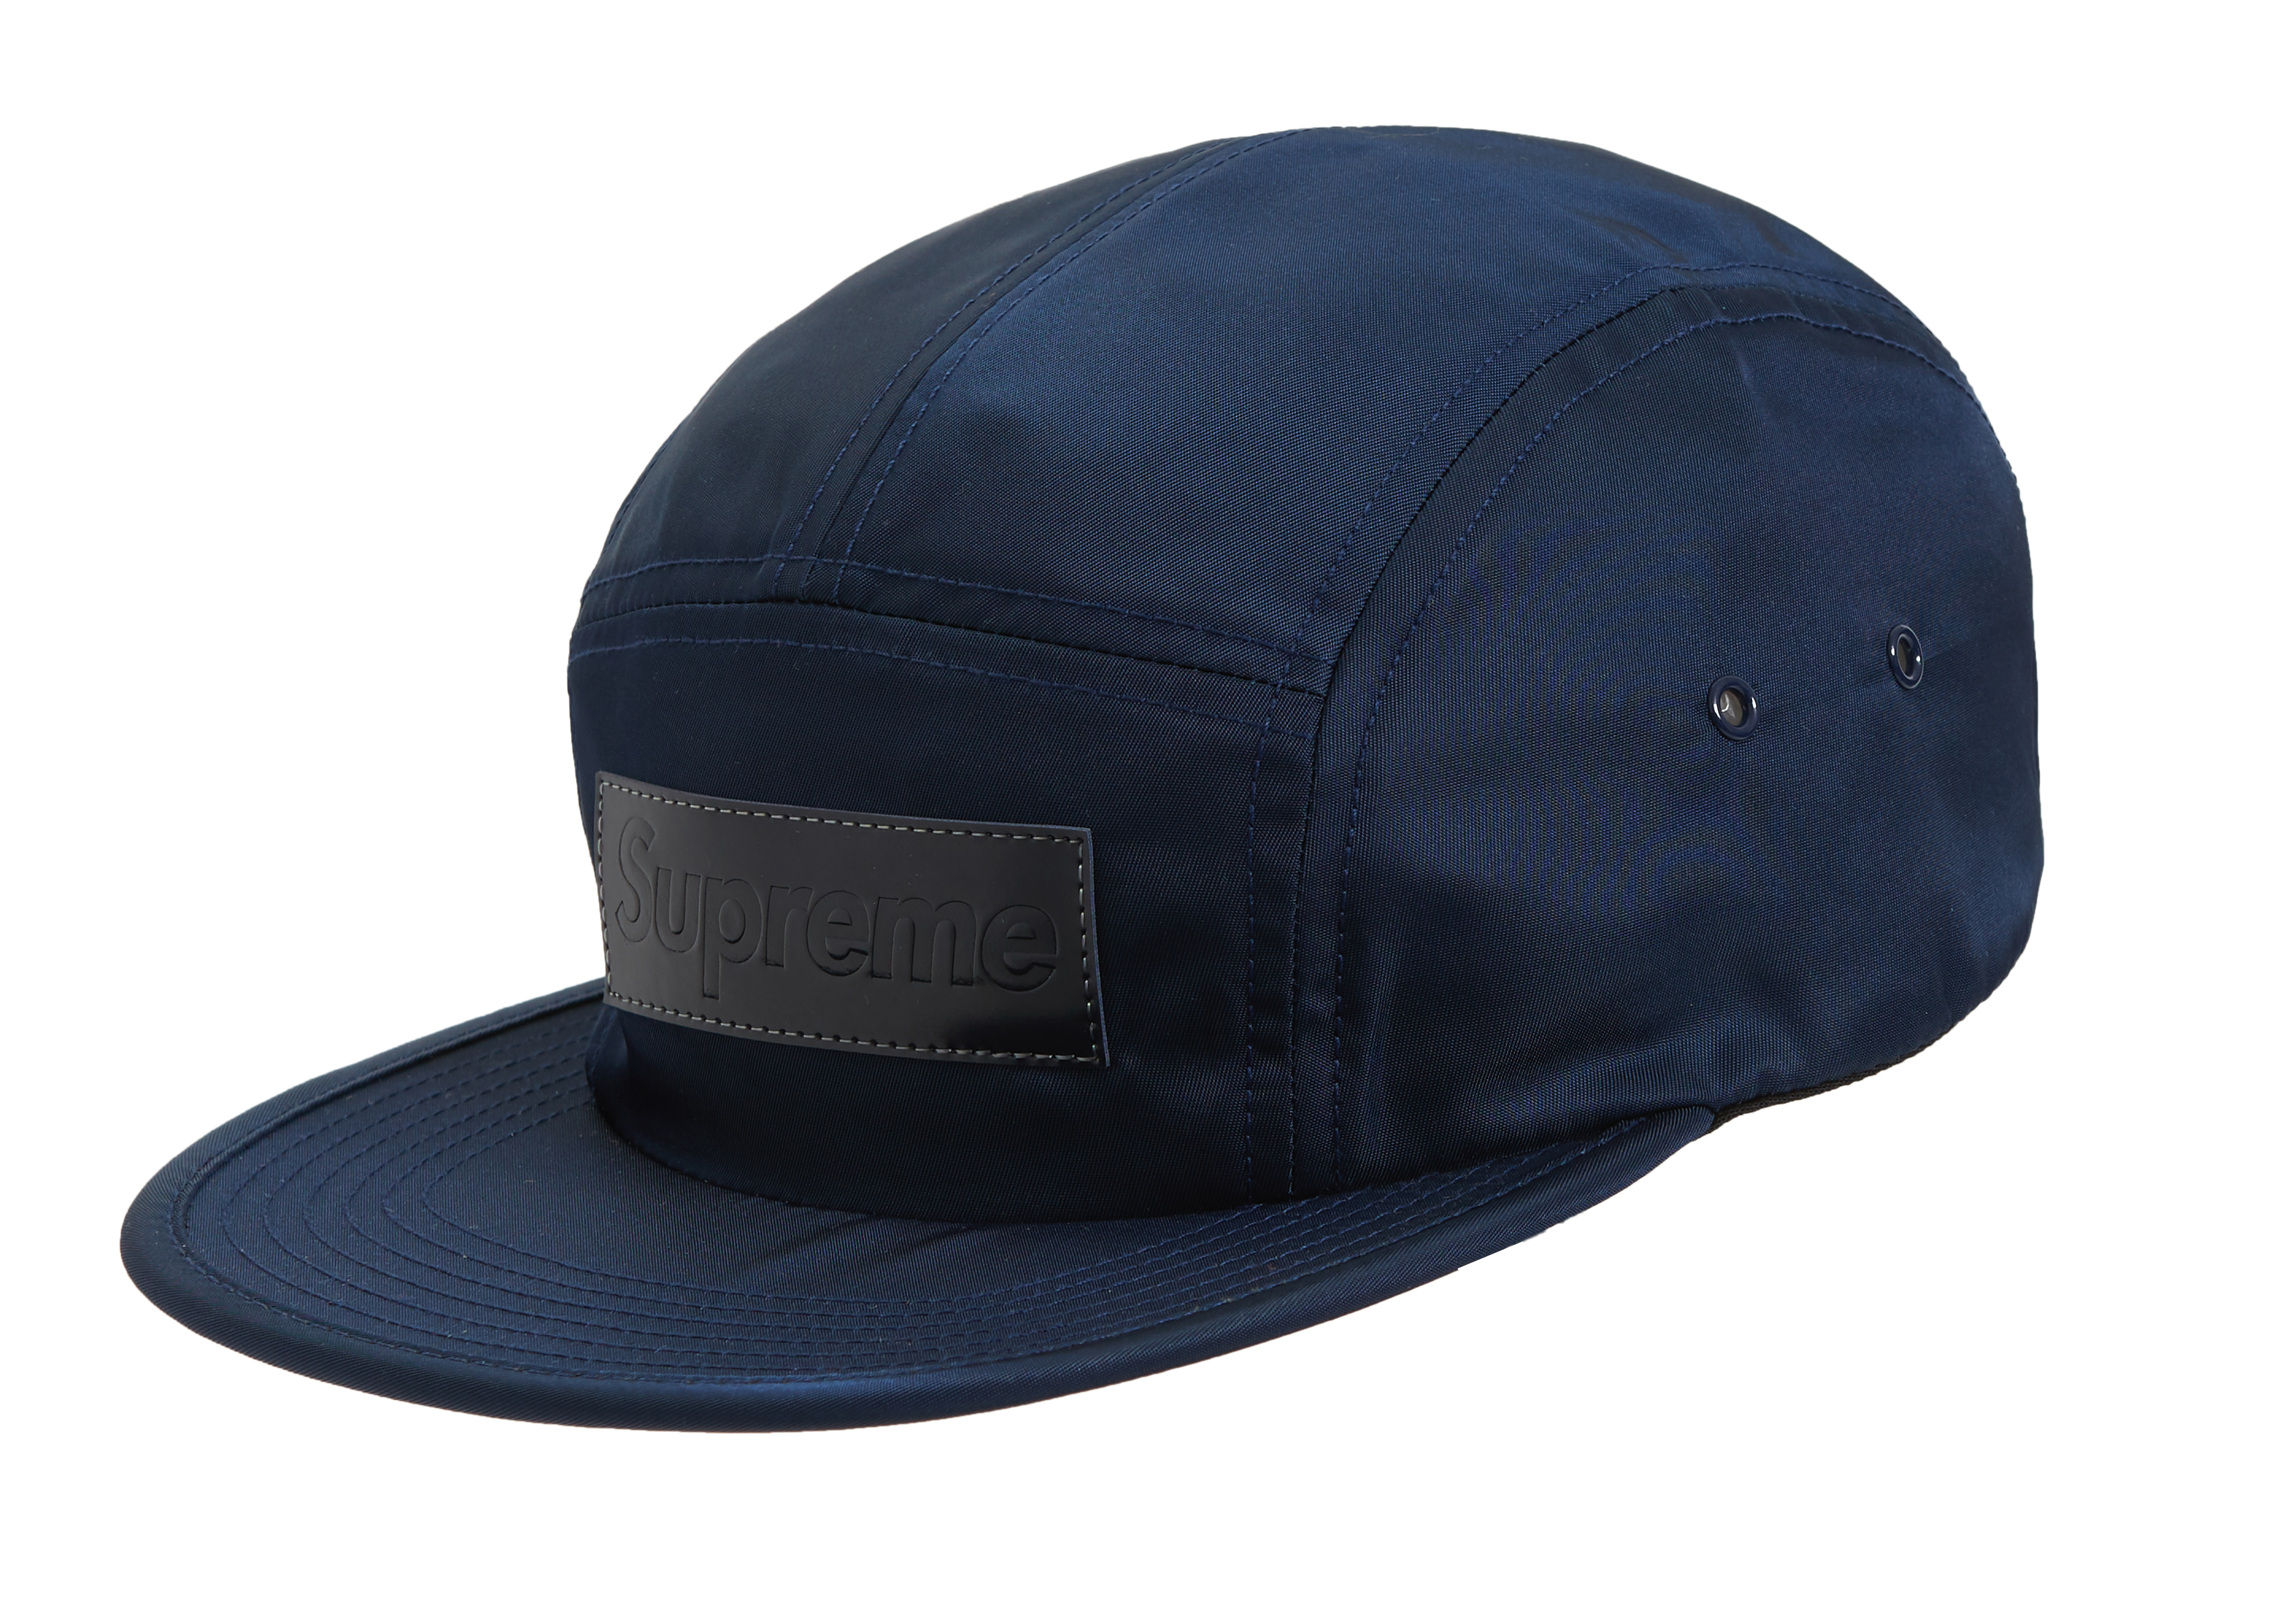 Supreme Expedition Leather Visor Camp Cap Stone - SS15 - US